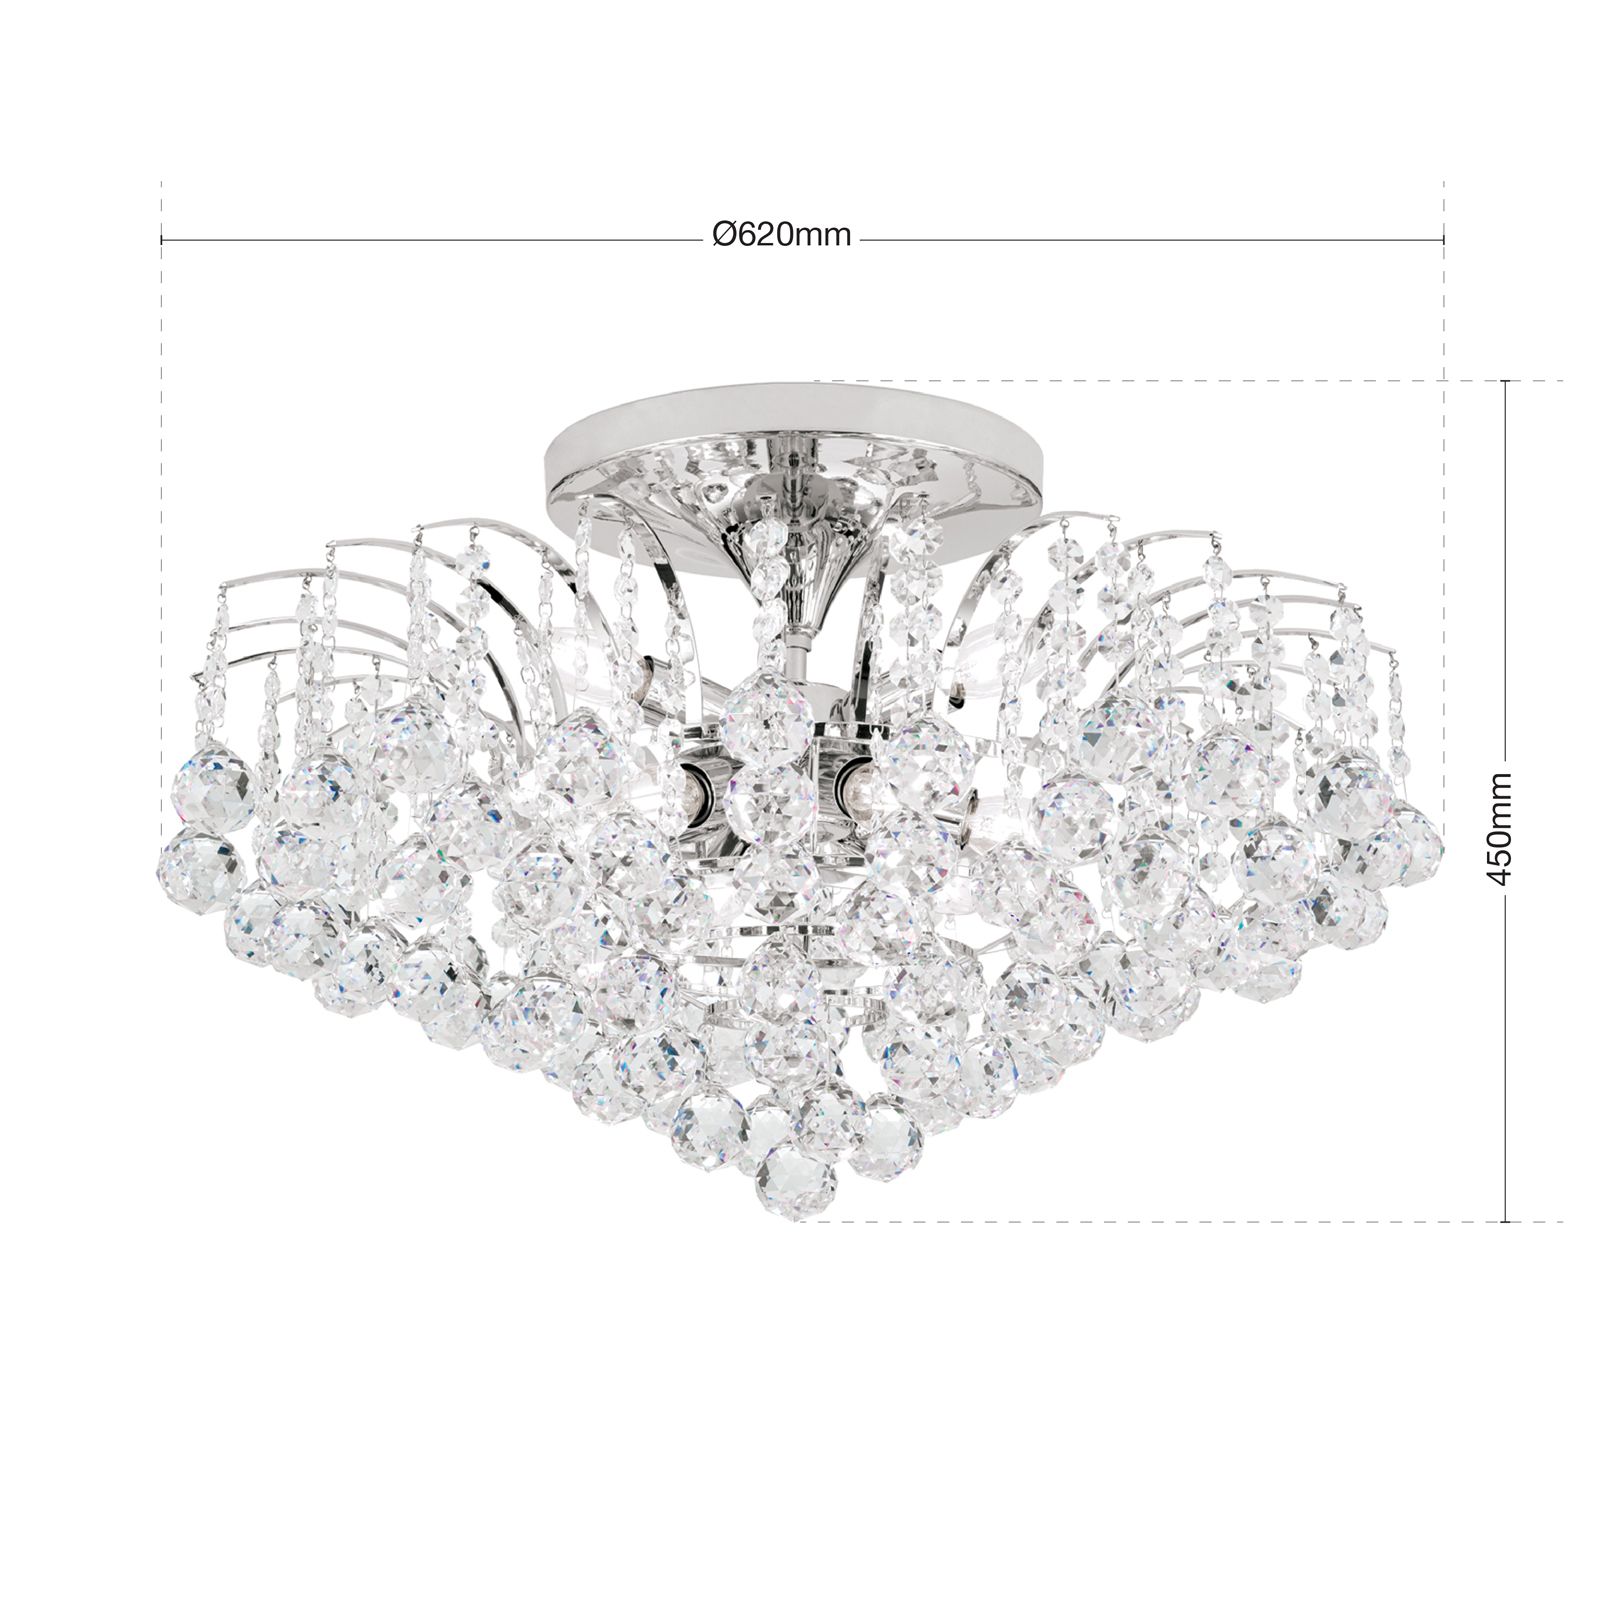 KRISTALL KLASSISCH ceiling light, 9 lamps, chrome plated, clear crystal